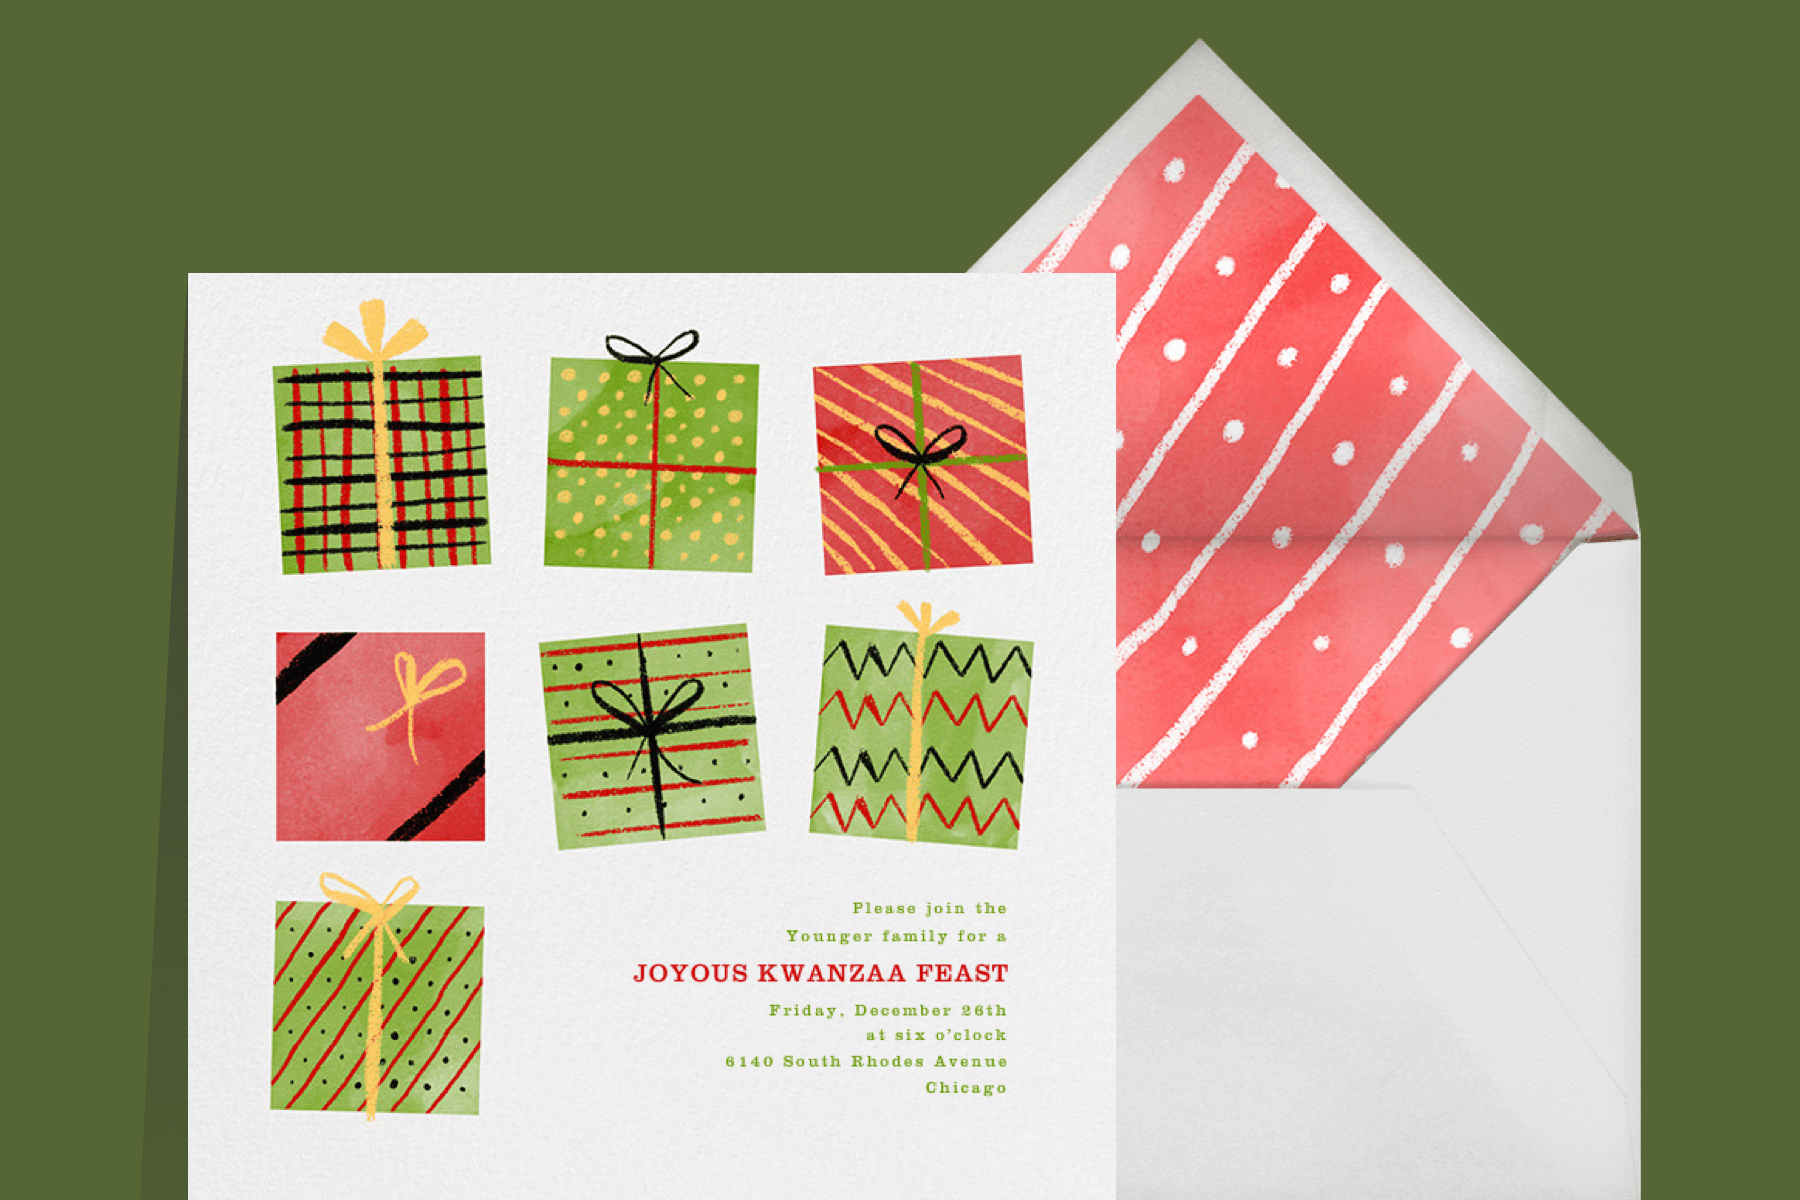 Kwanzaa invitation featuring illustrations of wrapped gifts.